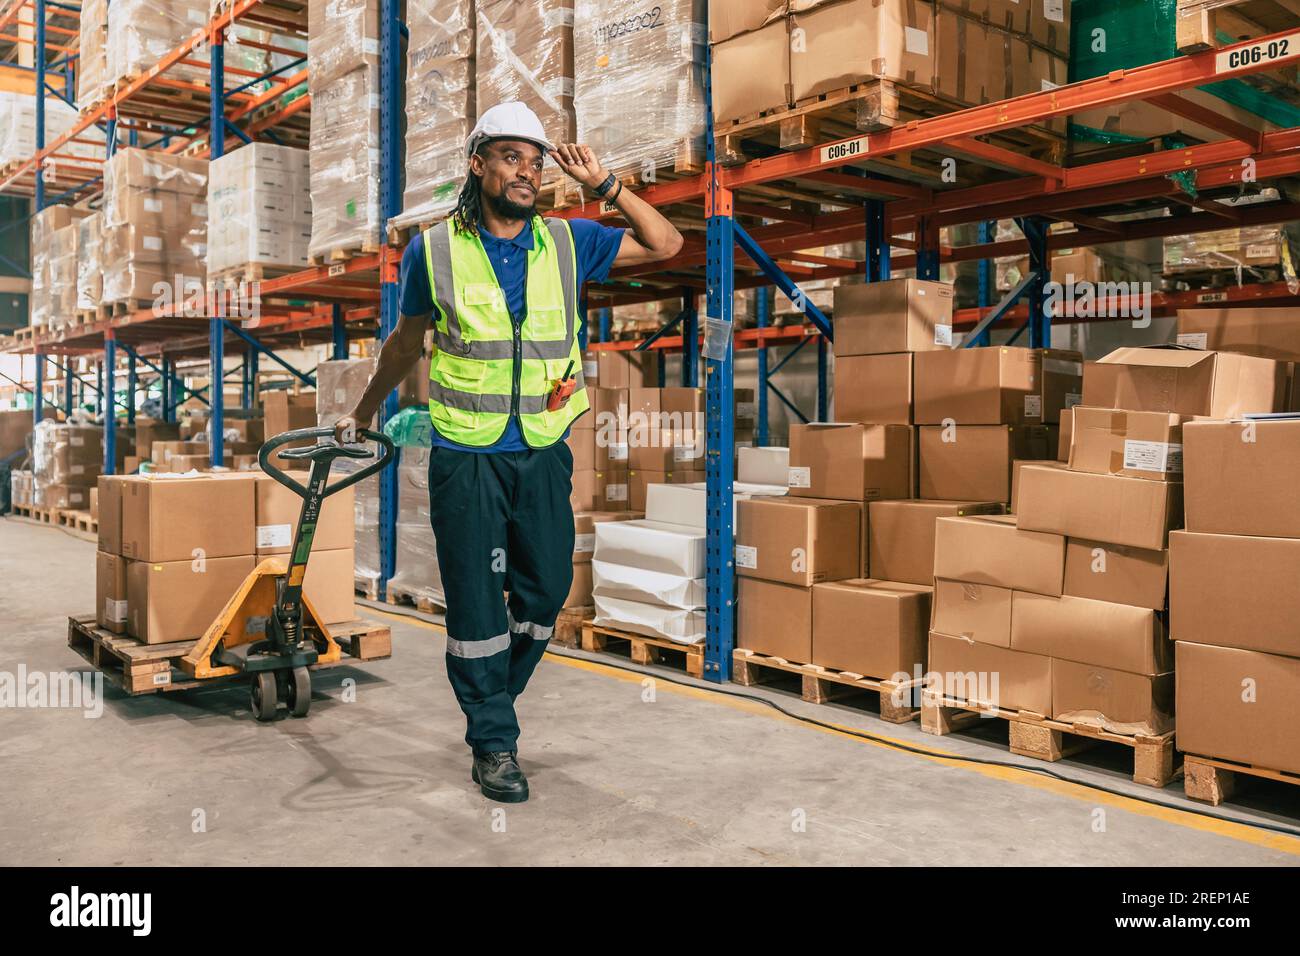 warehouse worker using parcel pallet in cargo shipping logistics ship supply management employee workplace concept Stock Photo